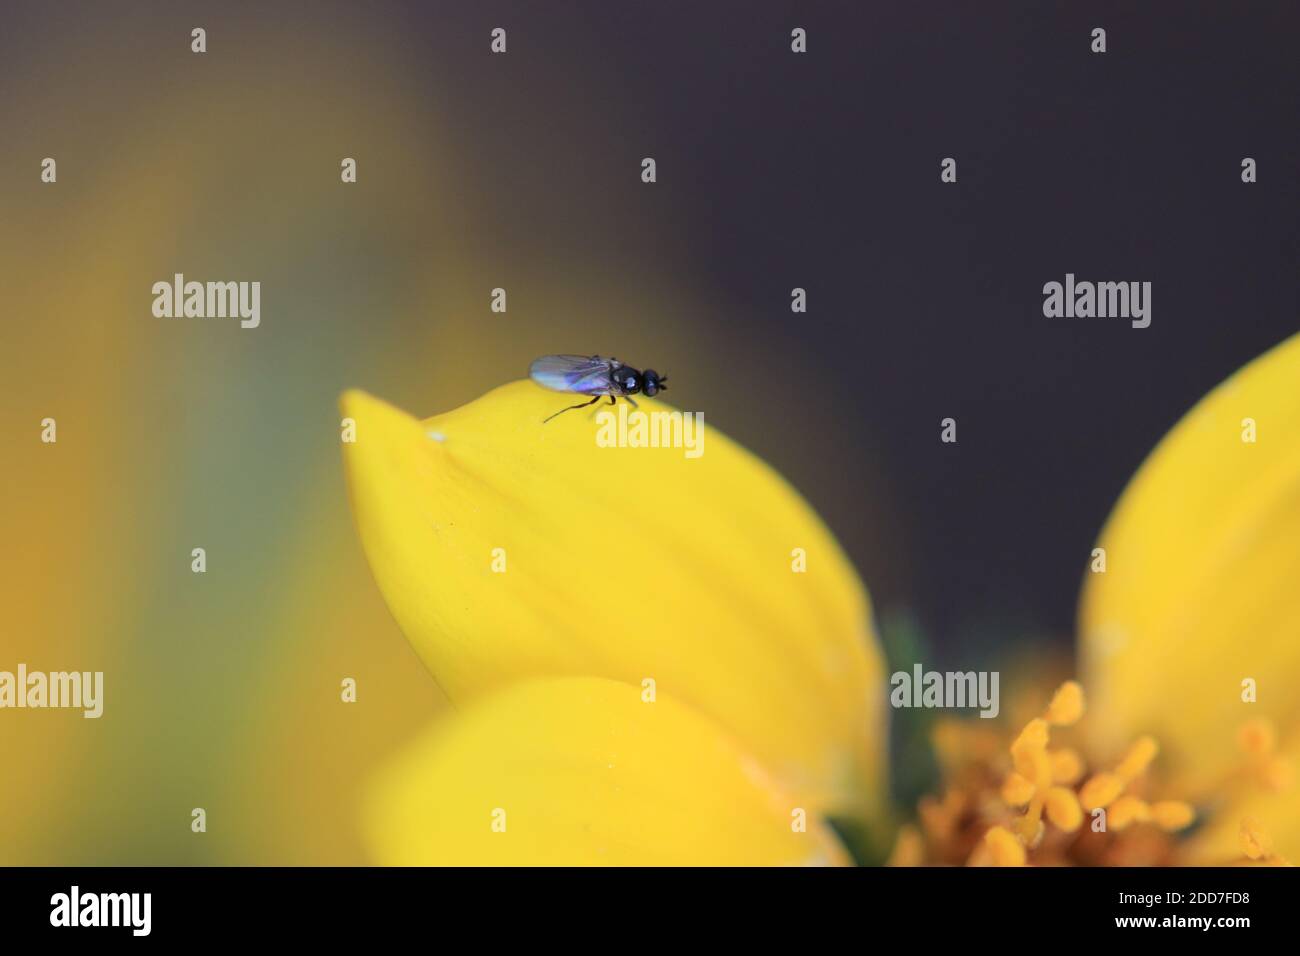 Tiny fly standing on the border of a yellow petal's flower Stock Photo